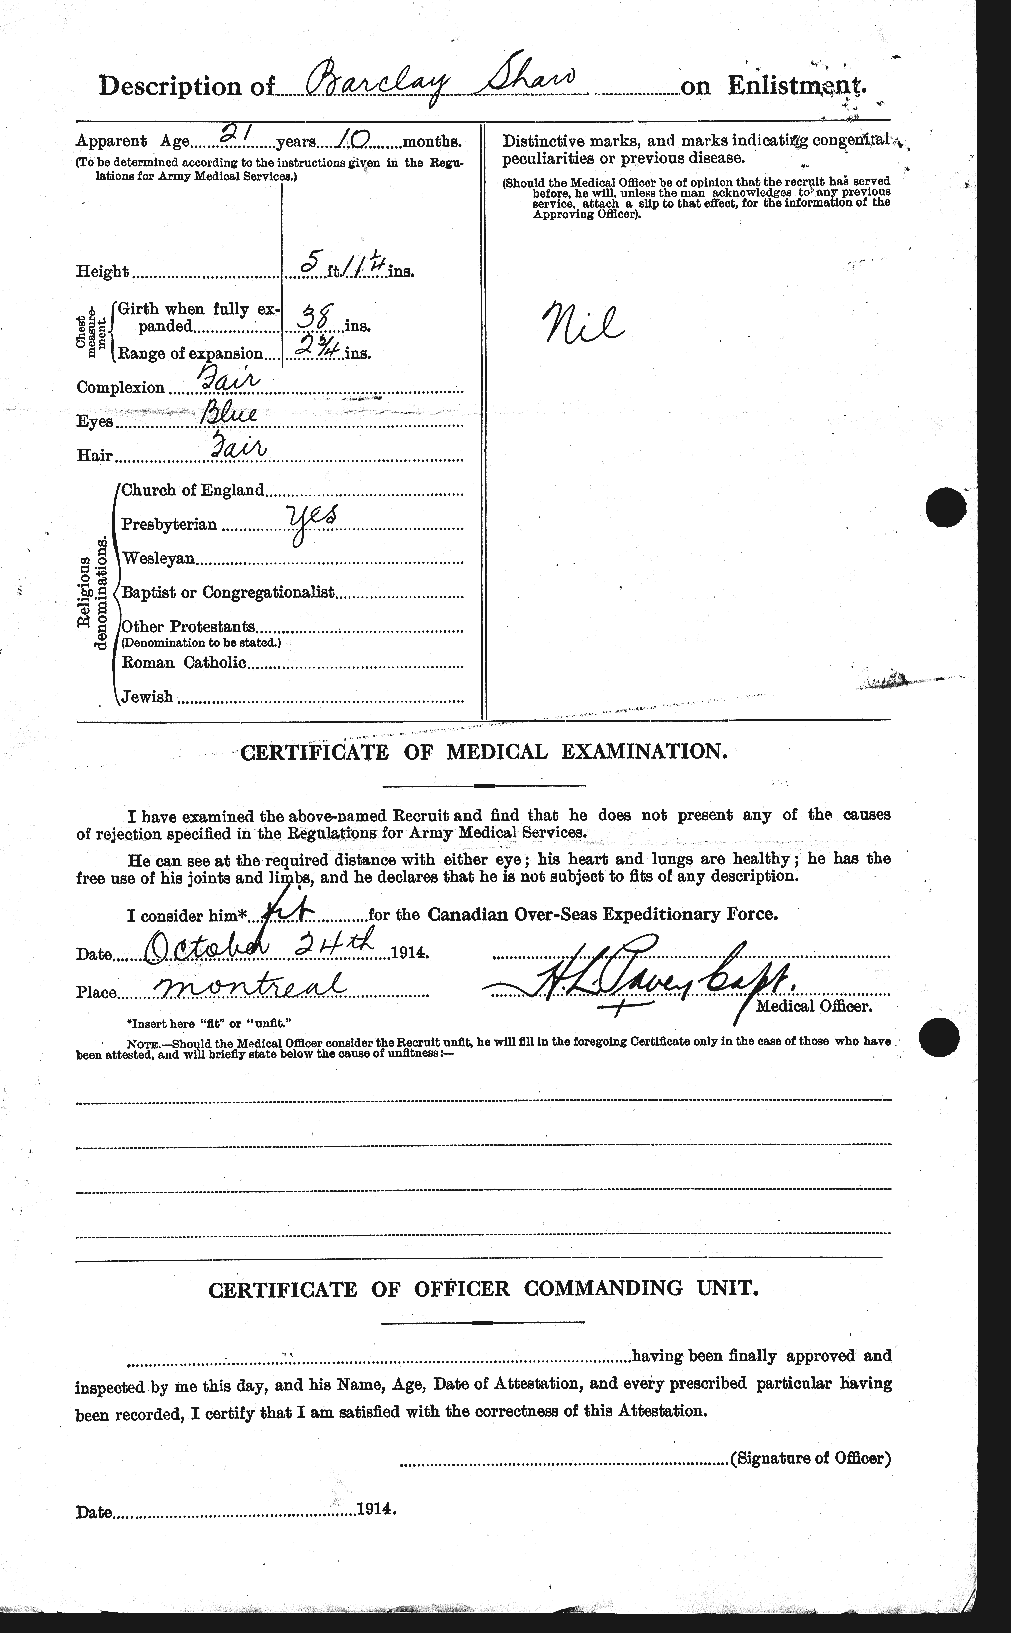 Personnel Records of the First World War - CEF 093221b